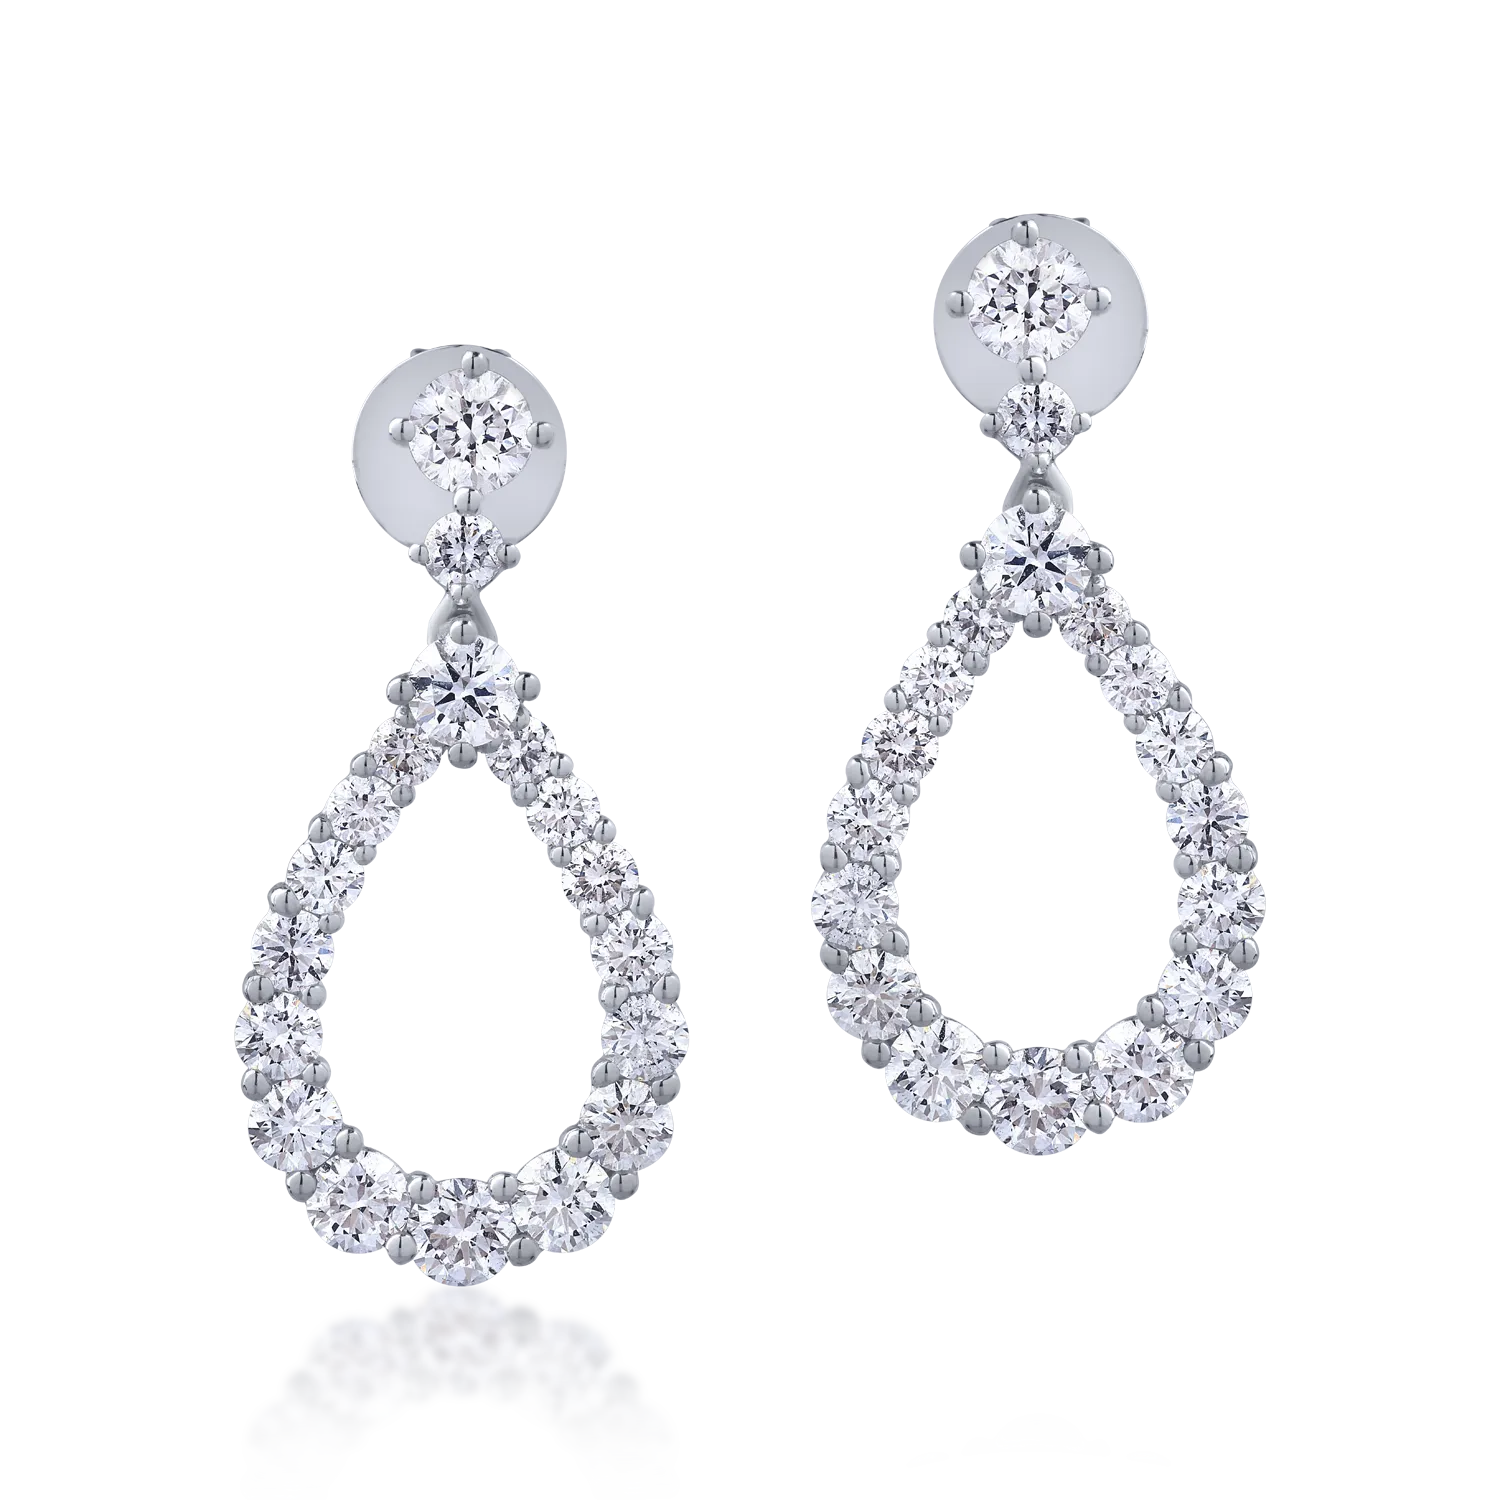 18K white gold earrings with 2.84ct diamonds